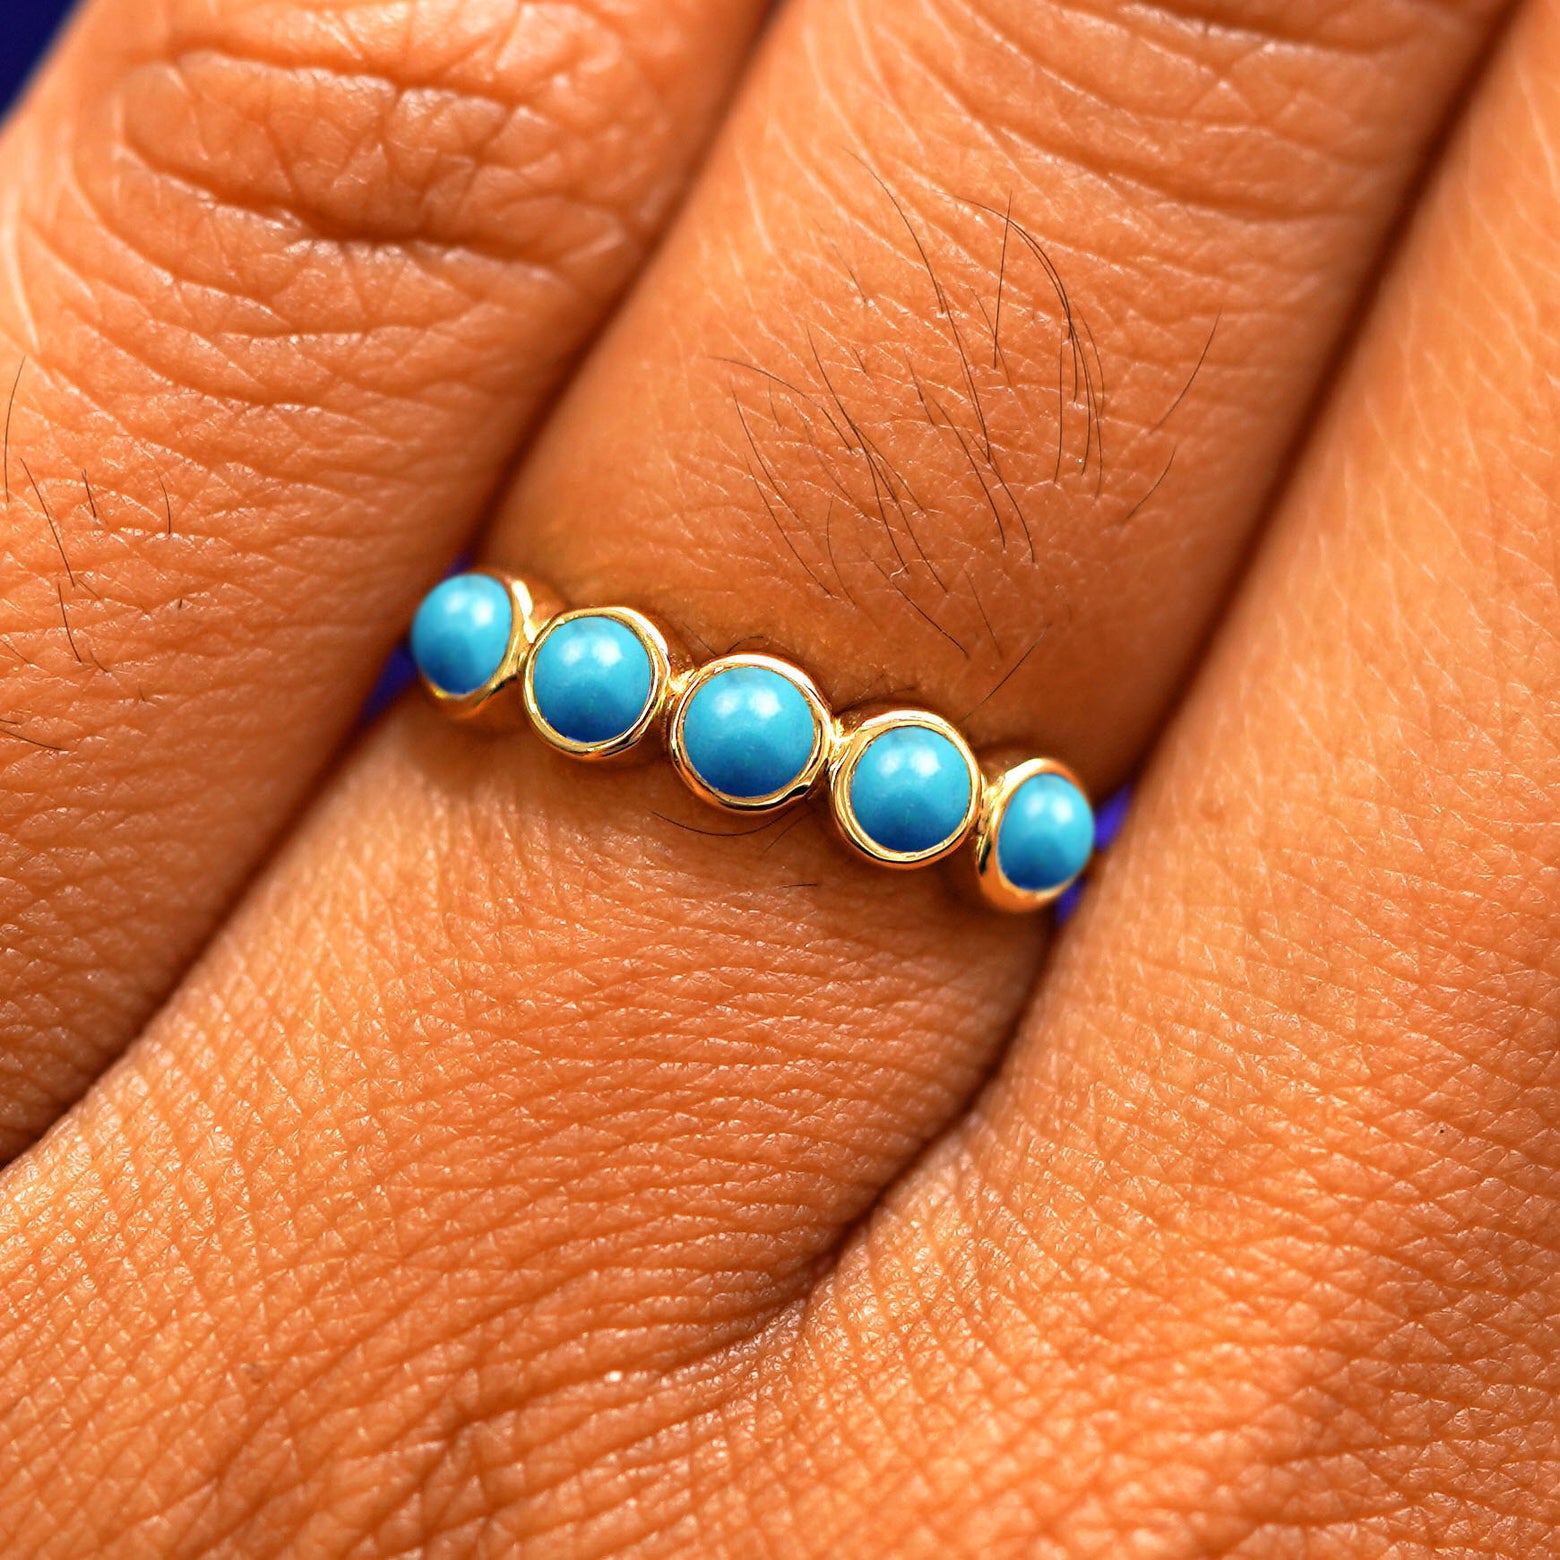 Close up view of a model's hand wearing a yellow gold 5 Gemstones Ring in turquoise